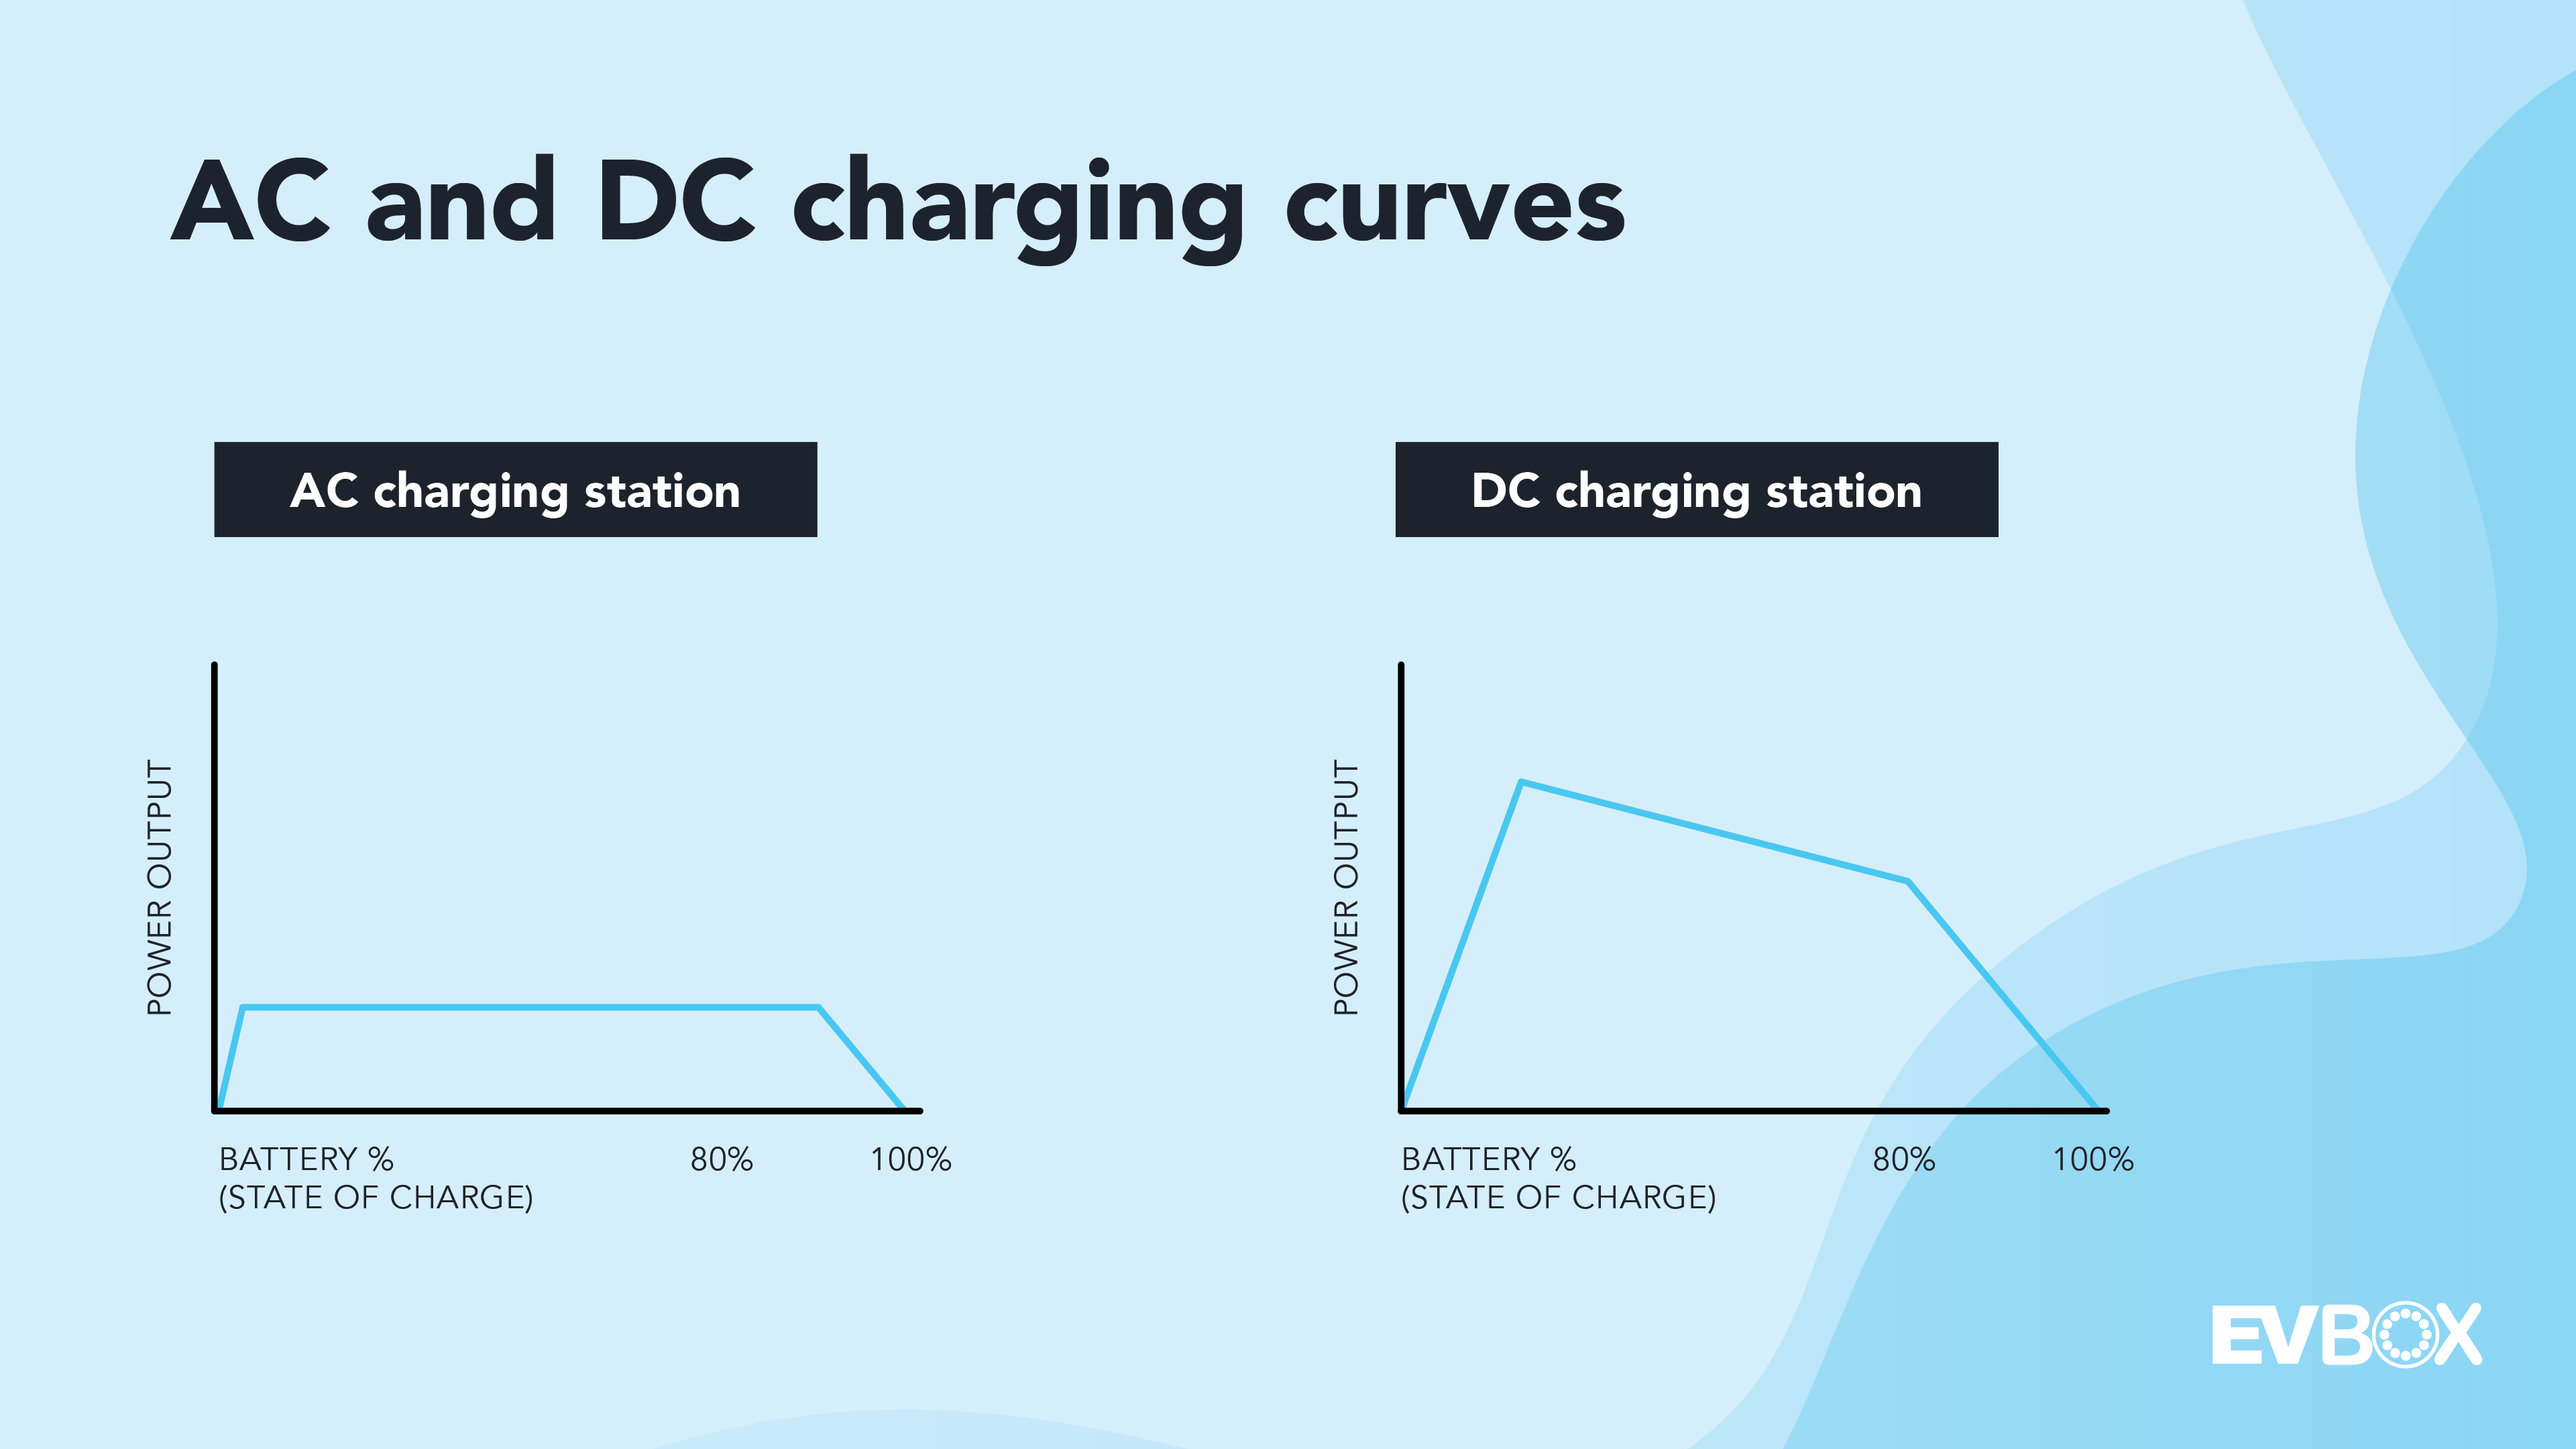 Infograph showing the difference between the battery's state of charge on AC and DC charging station.